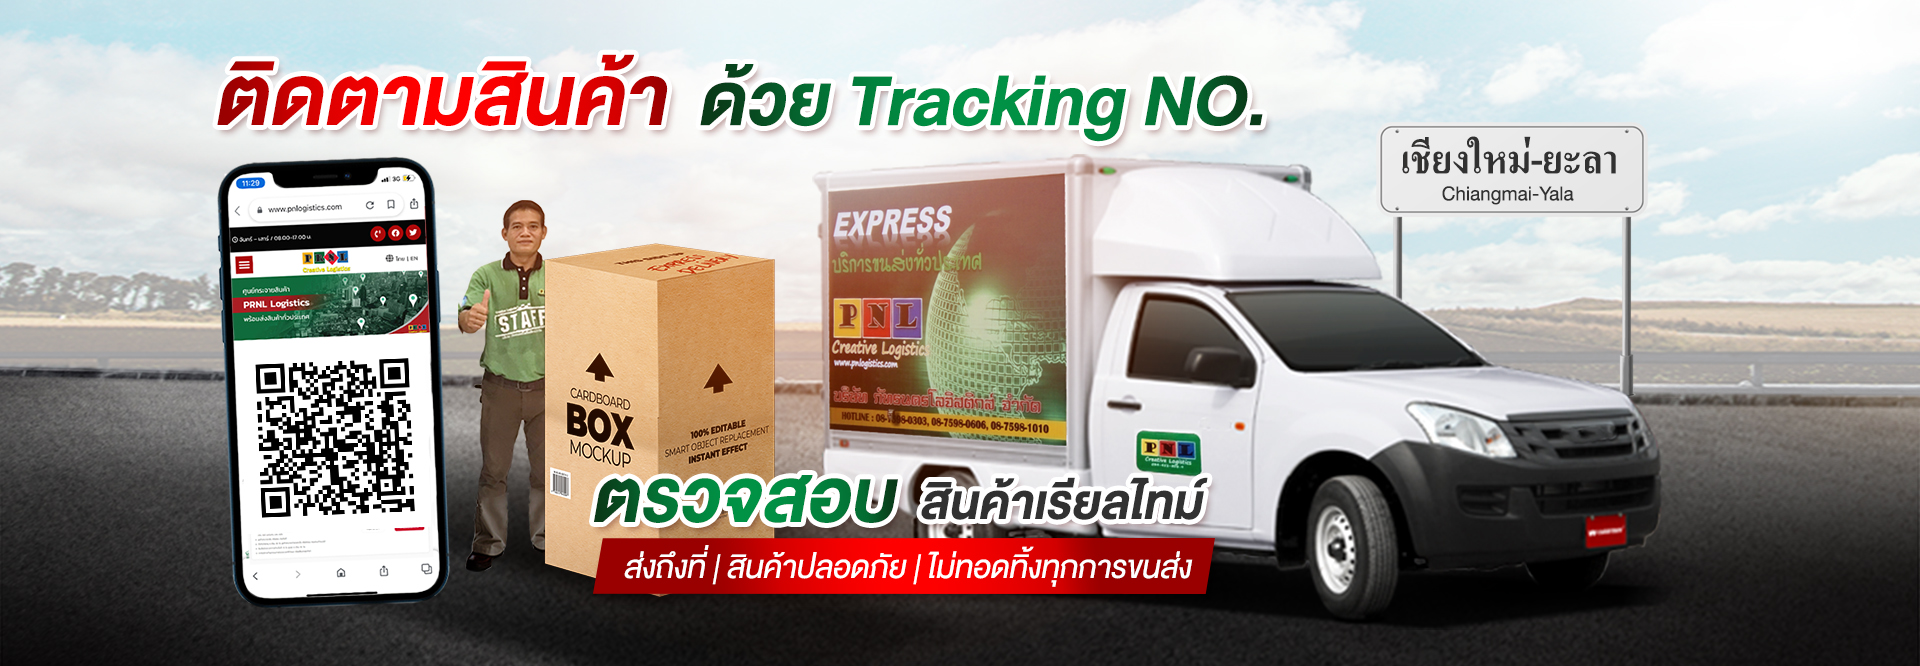 banner_Tracking